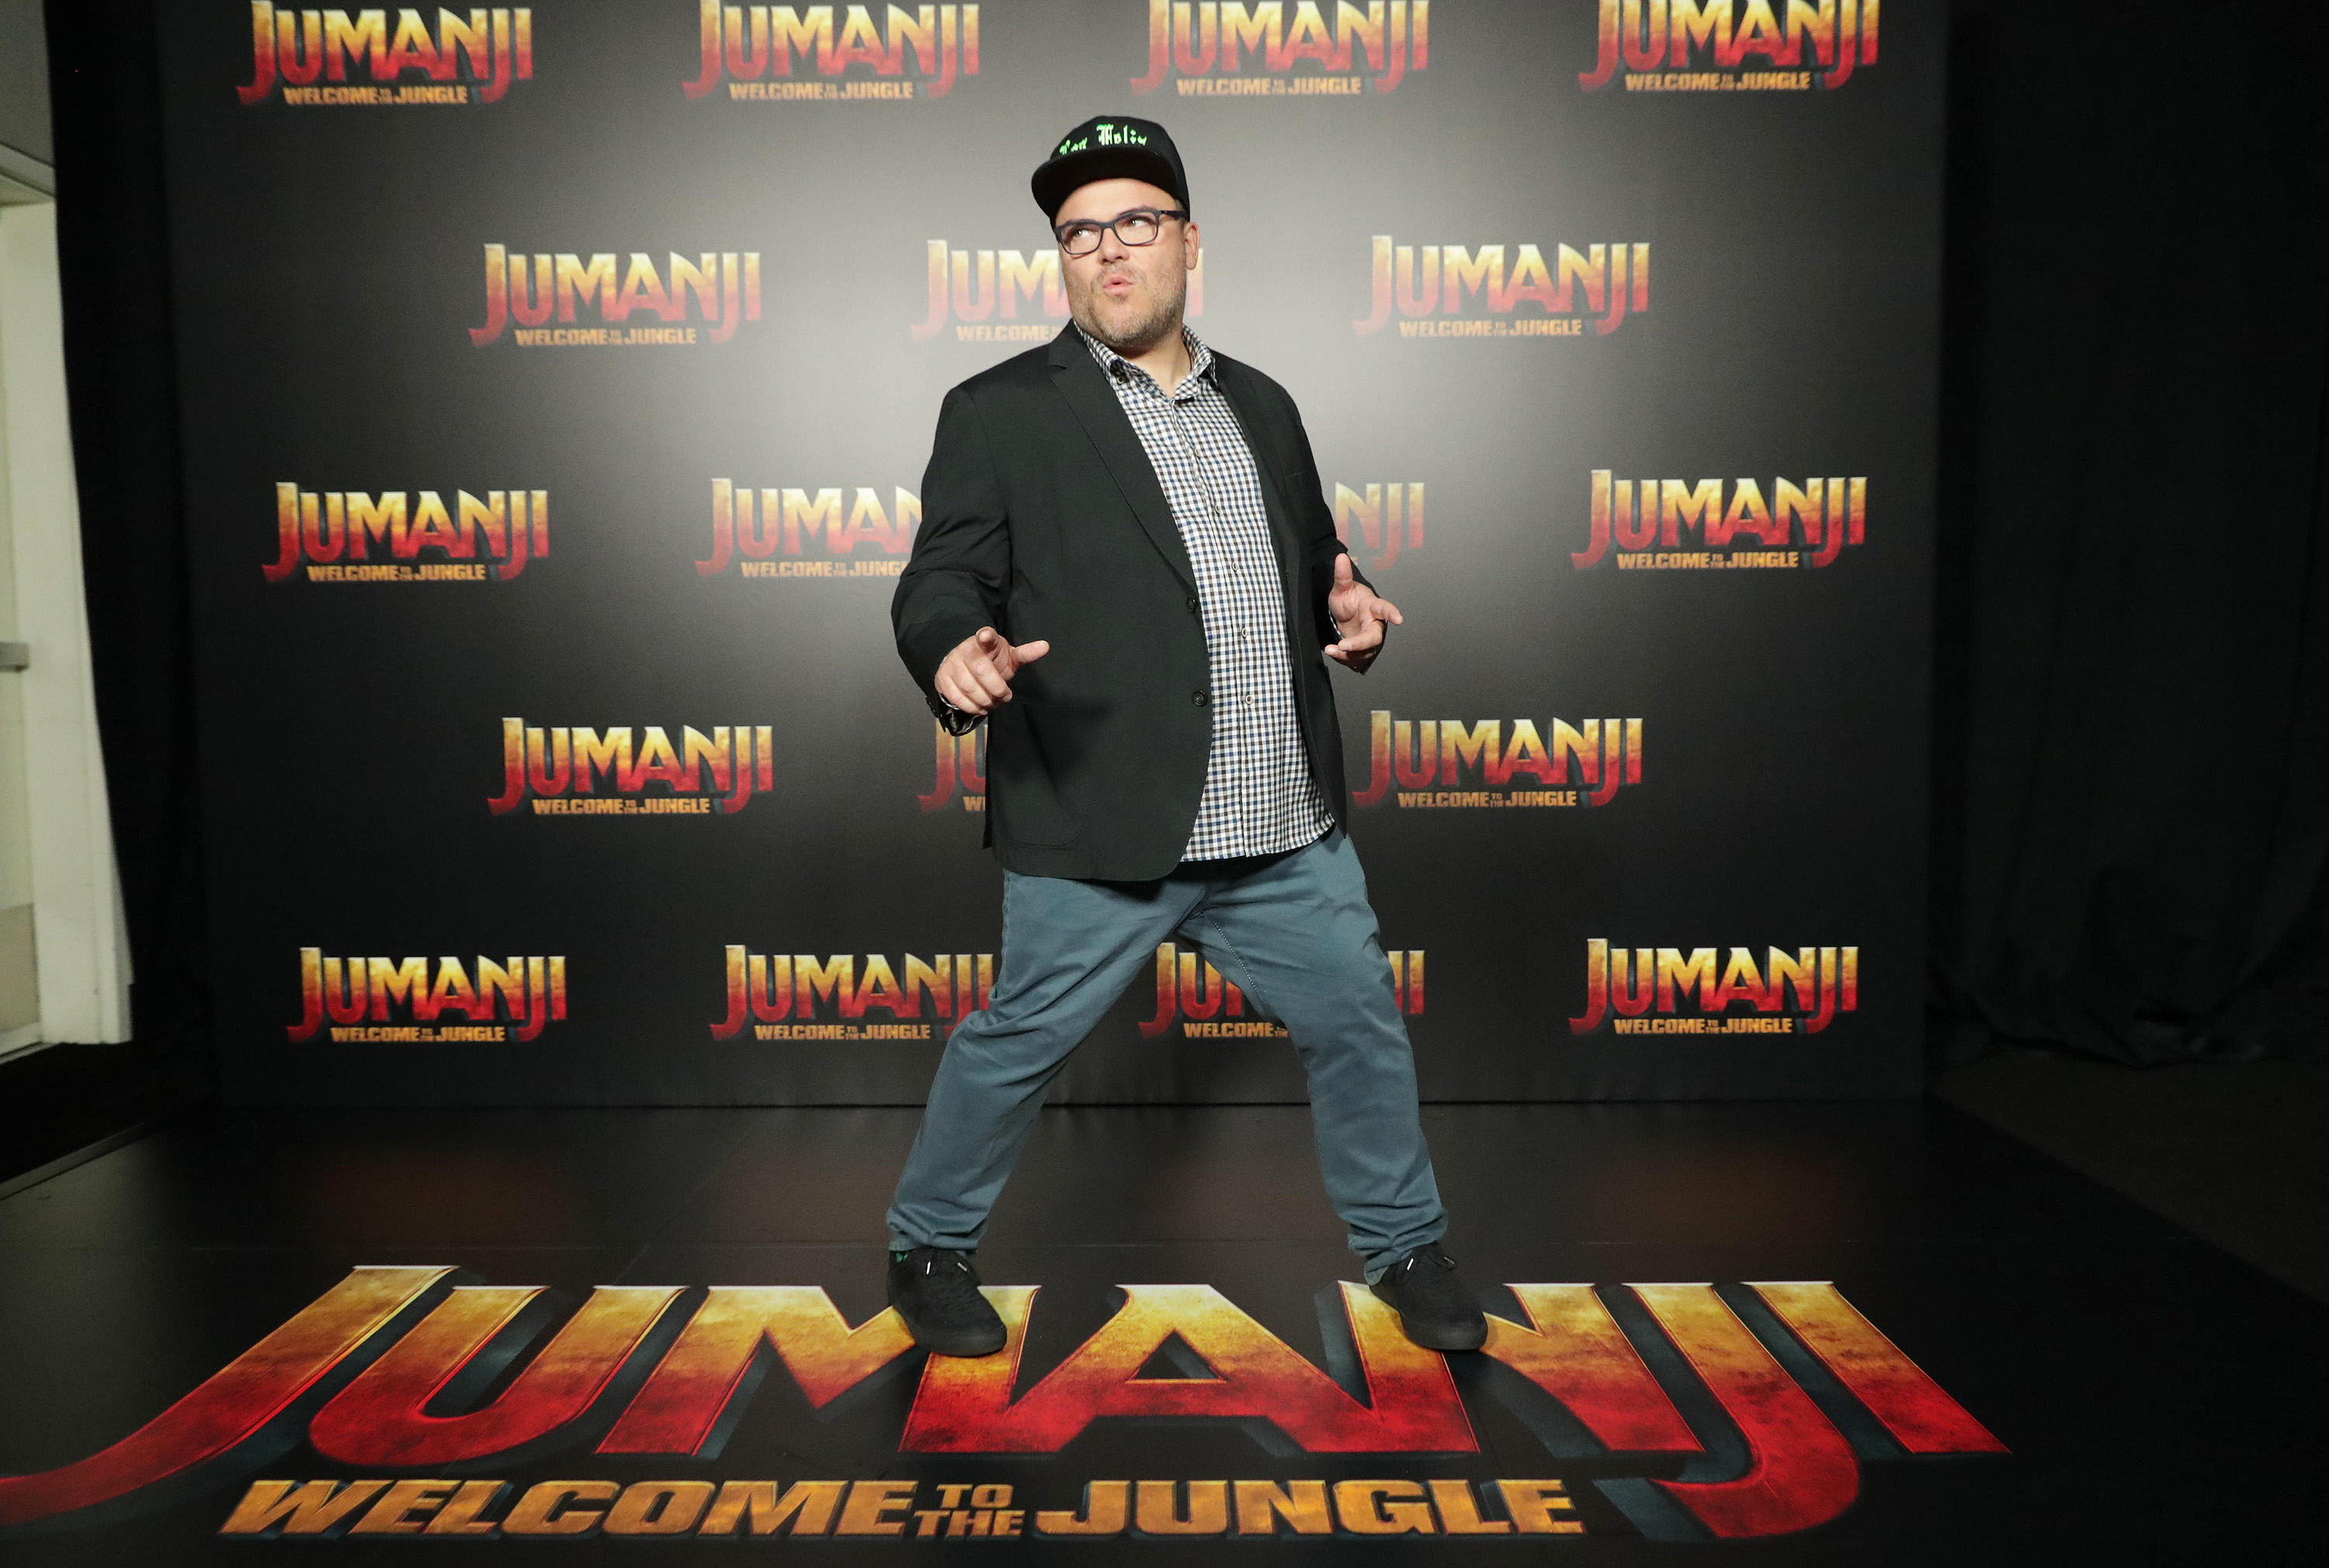 Jack Black seen at Columbia Pictures 'Jumanji: Welcome to the Jungle' photo call at 2017 CinemaCon on Monday, March 27, 2017, in Las Vegas.